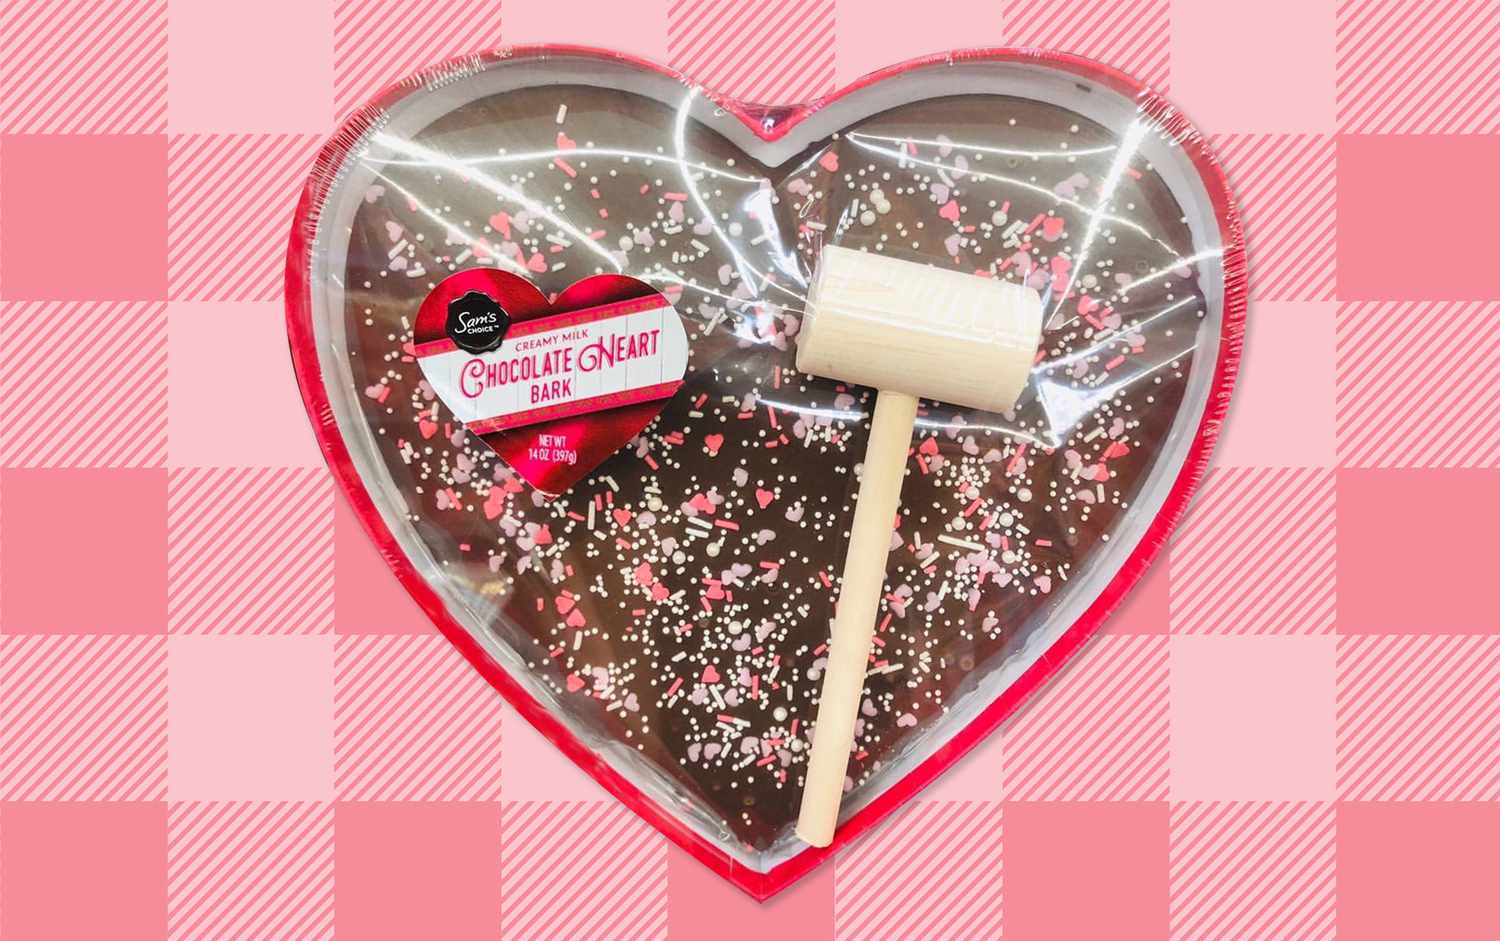 Packaged chocolate heart with a mallet for breaking